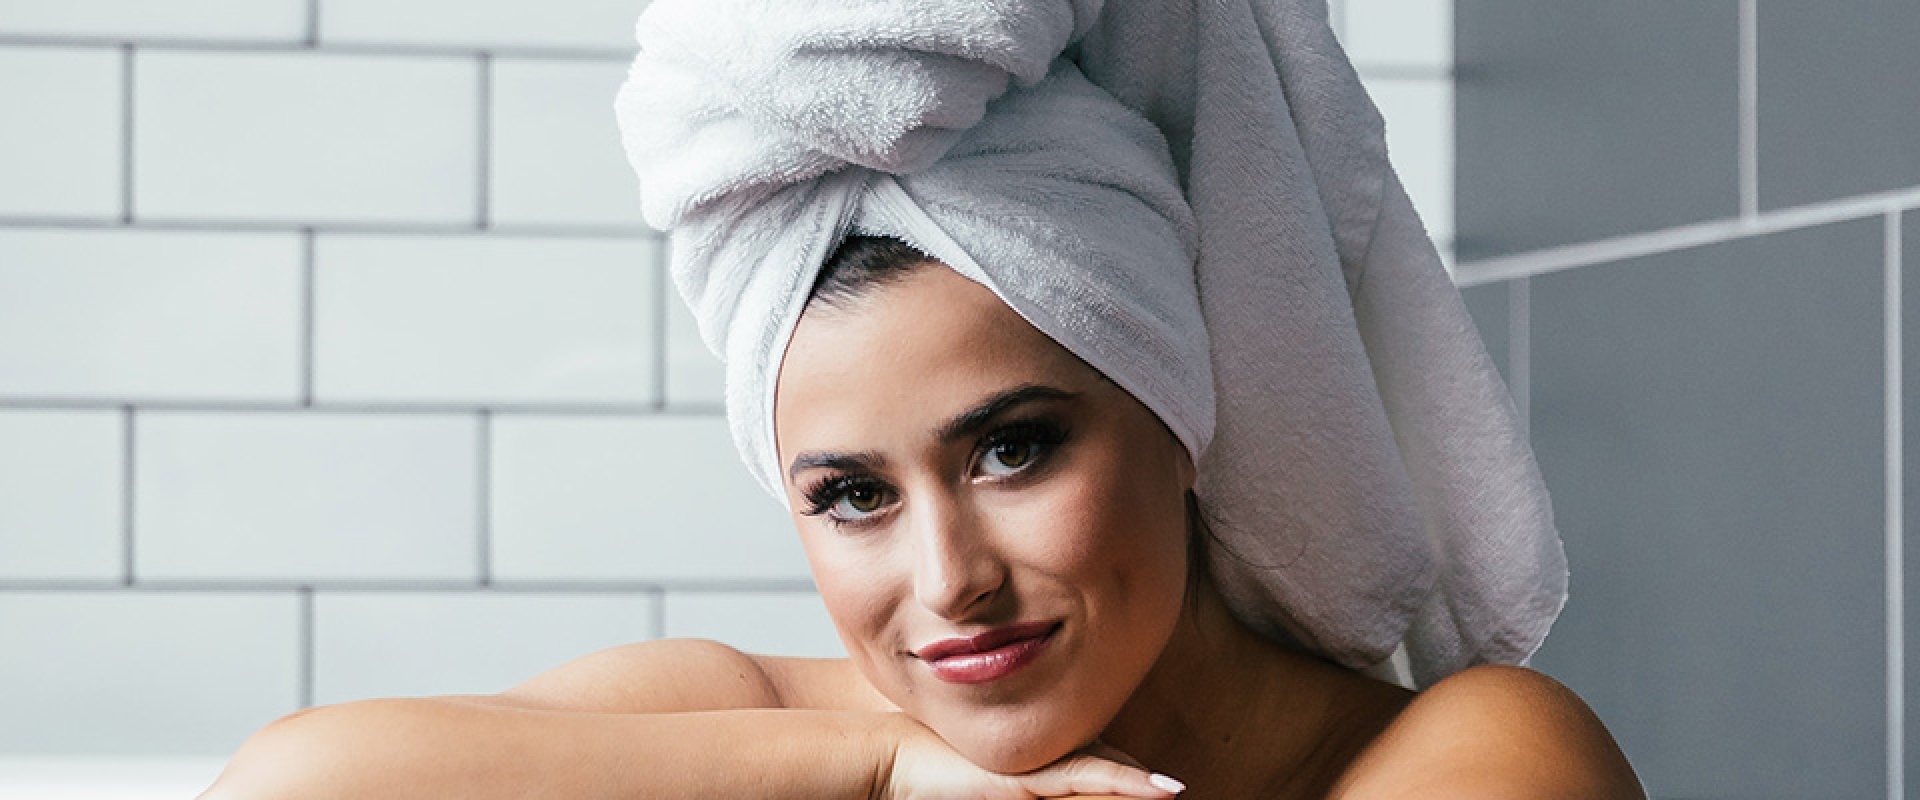 Scalp Care: How Often Should You Wash Your Hair?